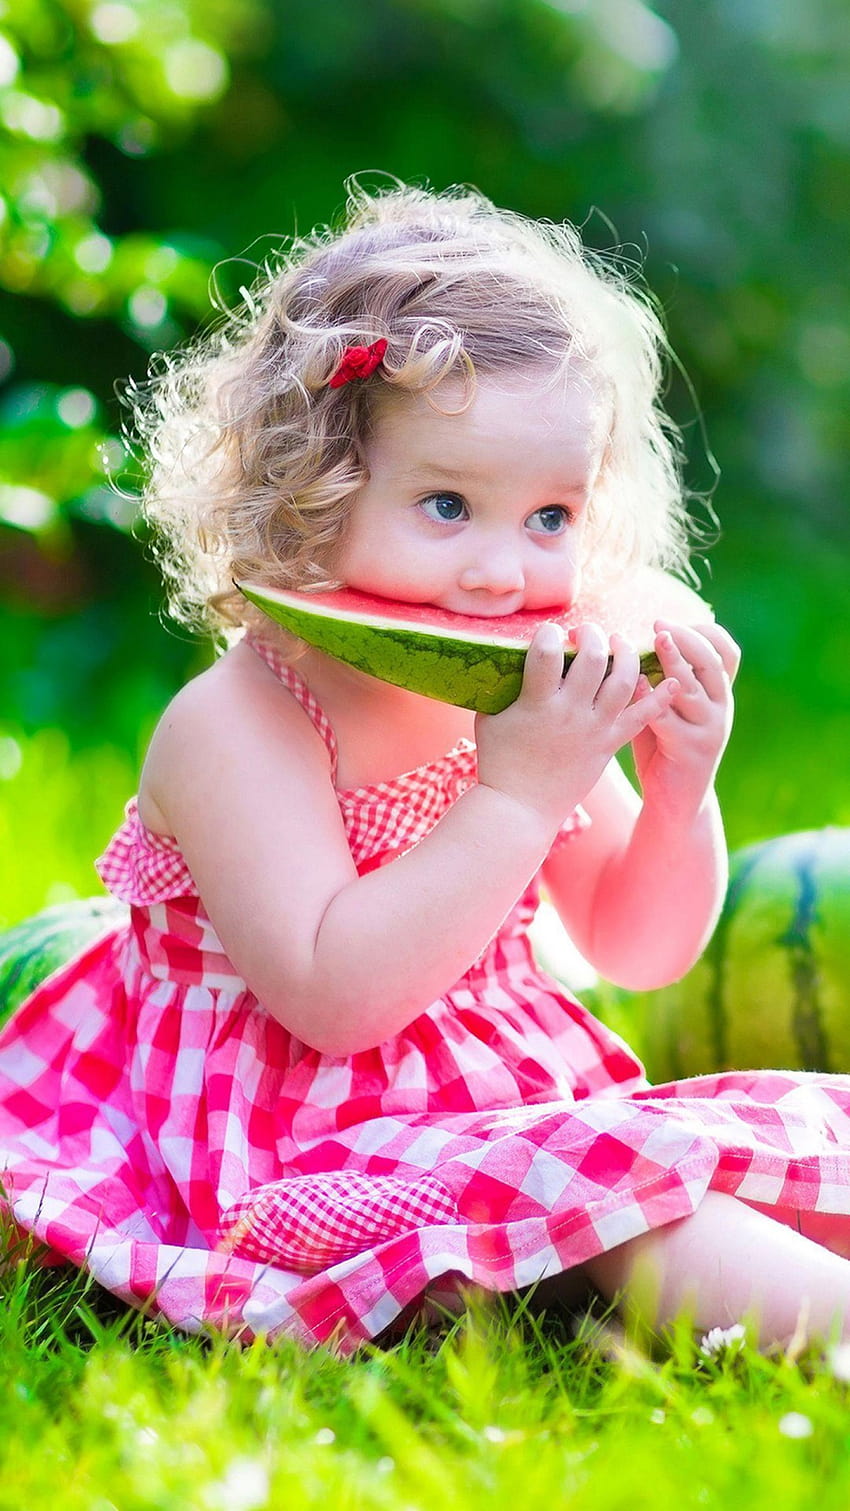 Cute Baby Girl Is Sitting On Green Grass Eating Watermelon Wearing ...